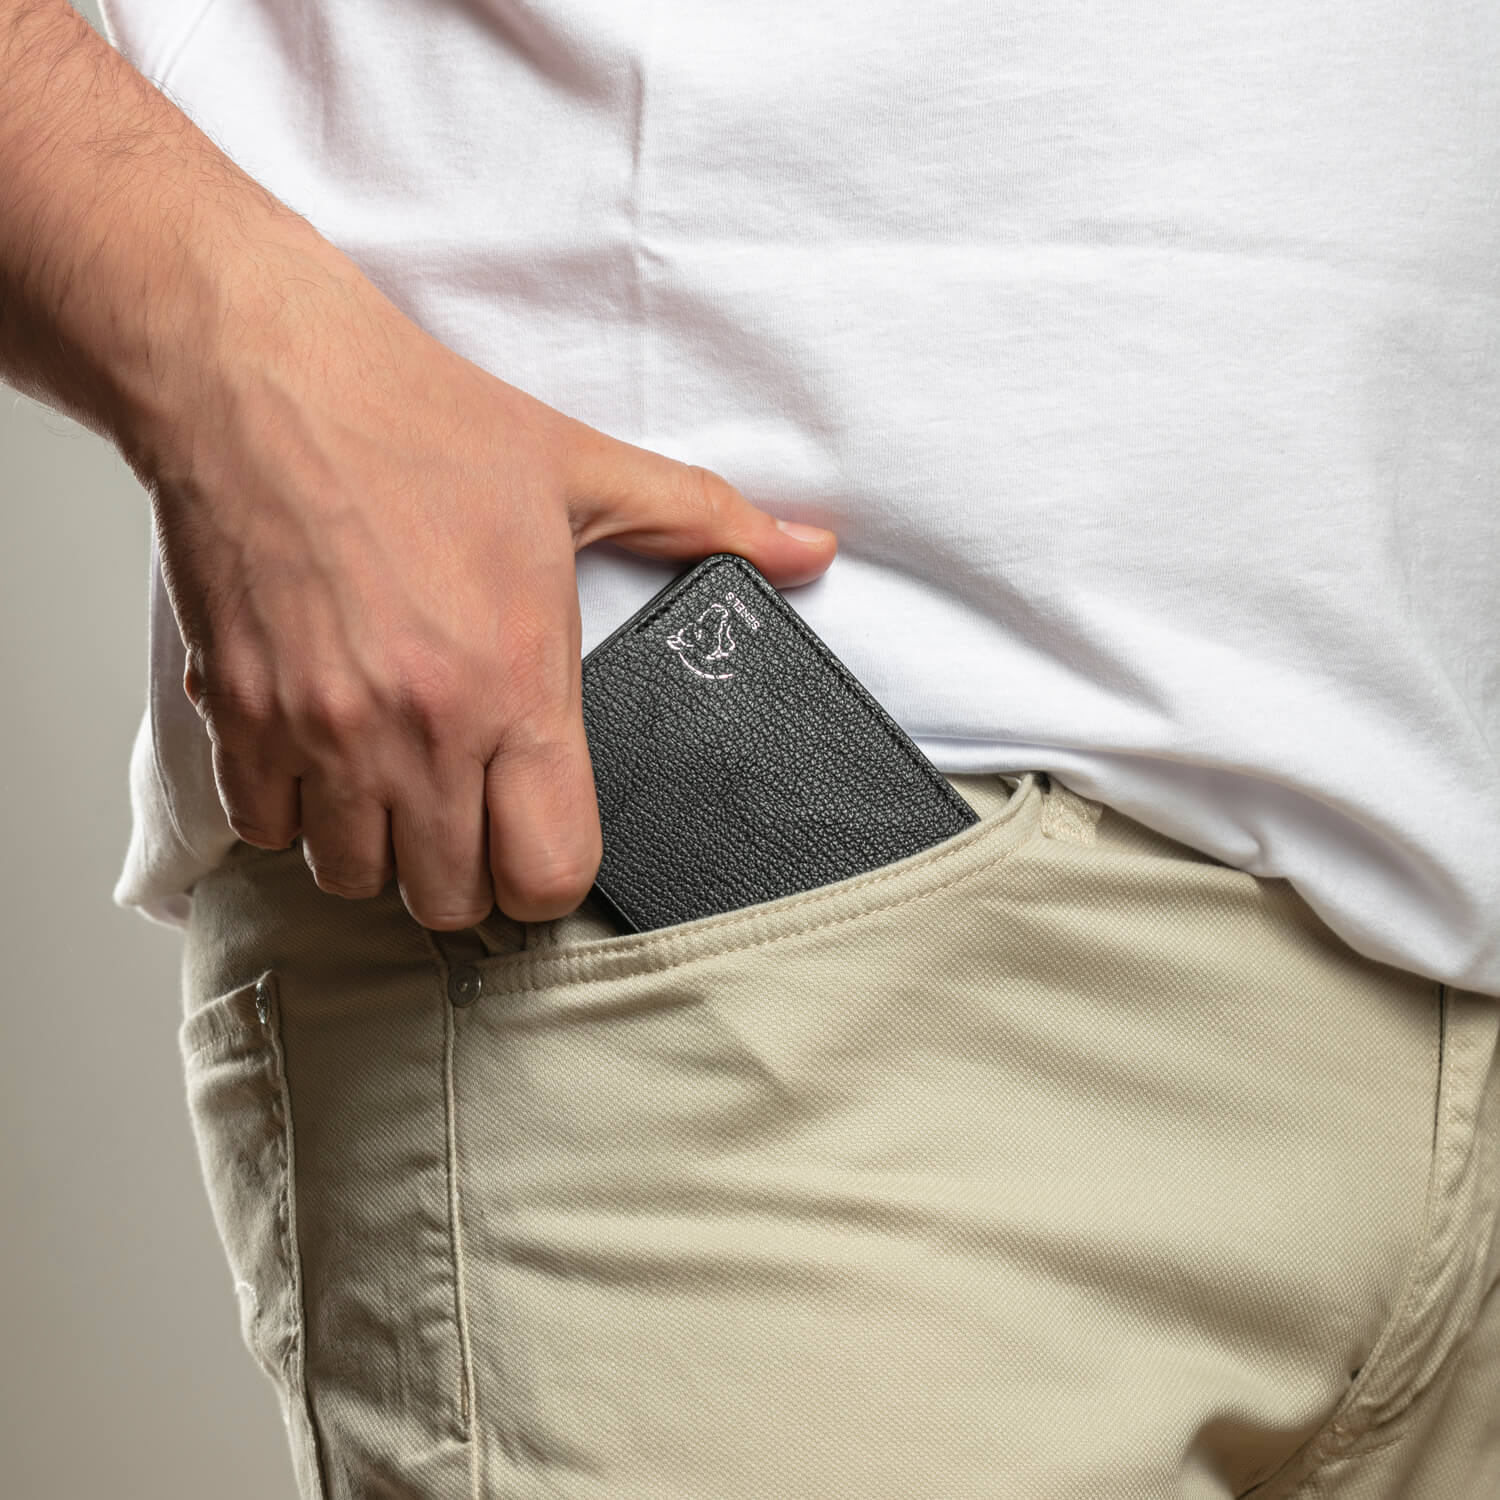 Serel's Classic Wallet getting into your pants pocket